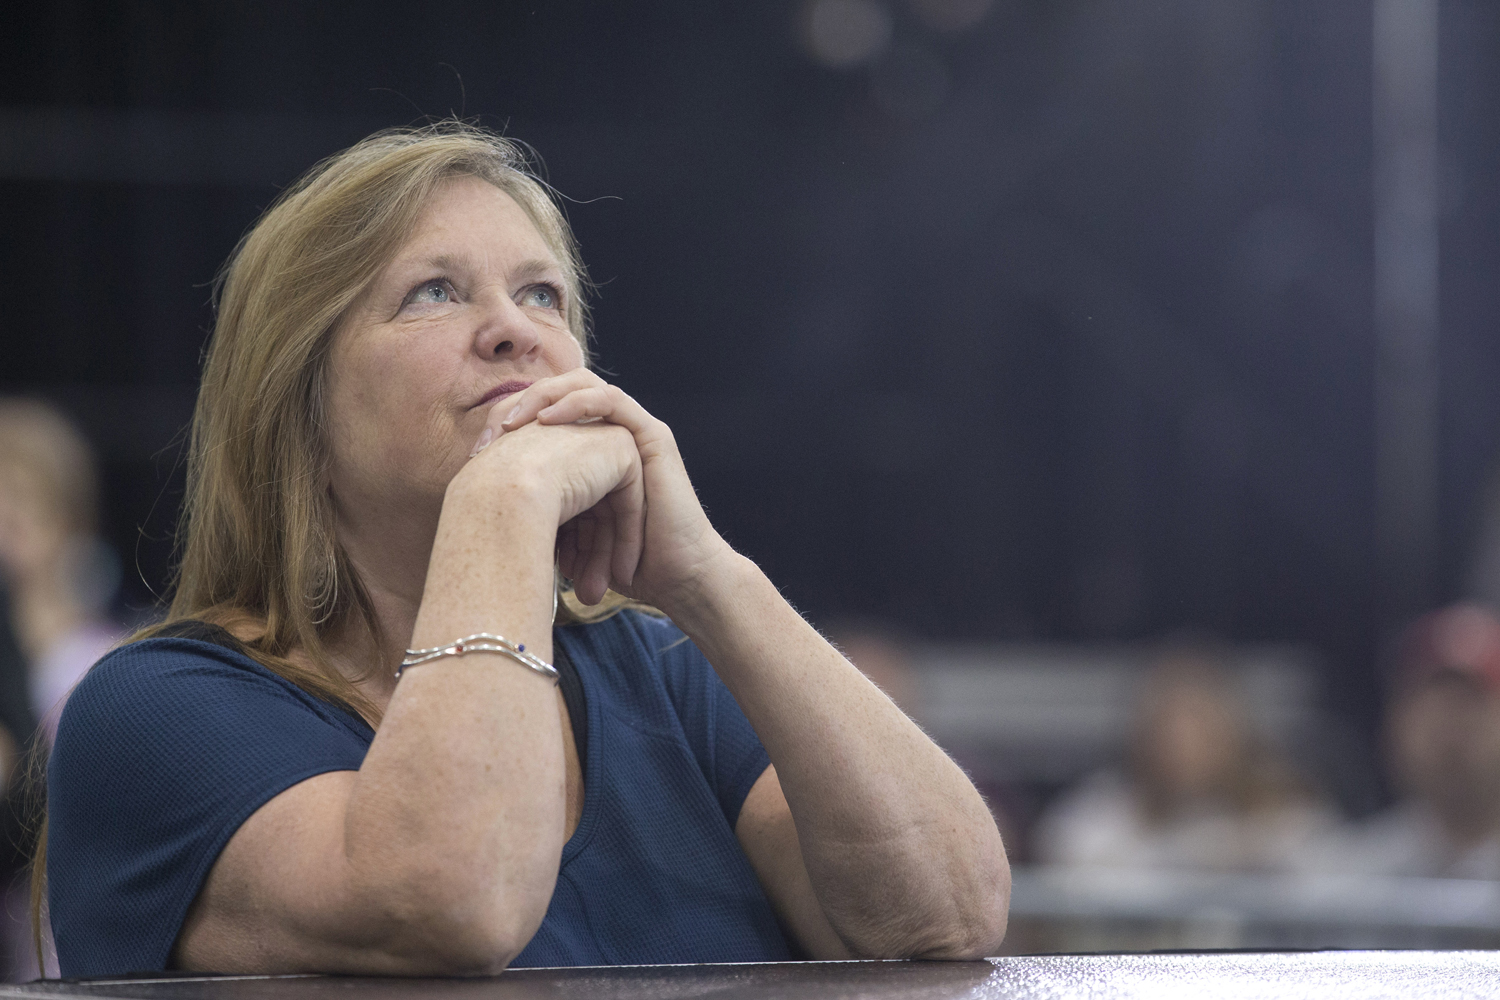 Jane Sanders, wife of Sen. Bernie Sanders, listens as he speaks during a campaign rally in Erie, Pa., Tuesday, April 19, 2016. (Mary Altaffer/AP)